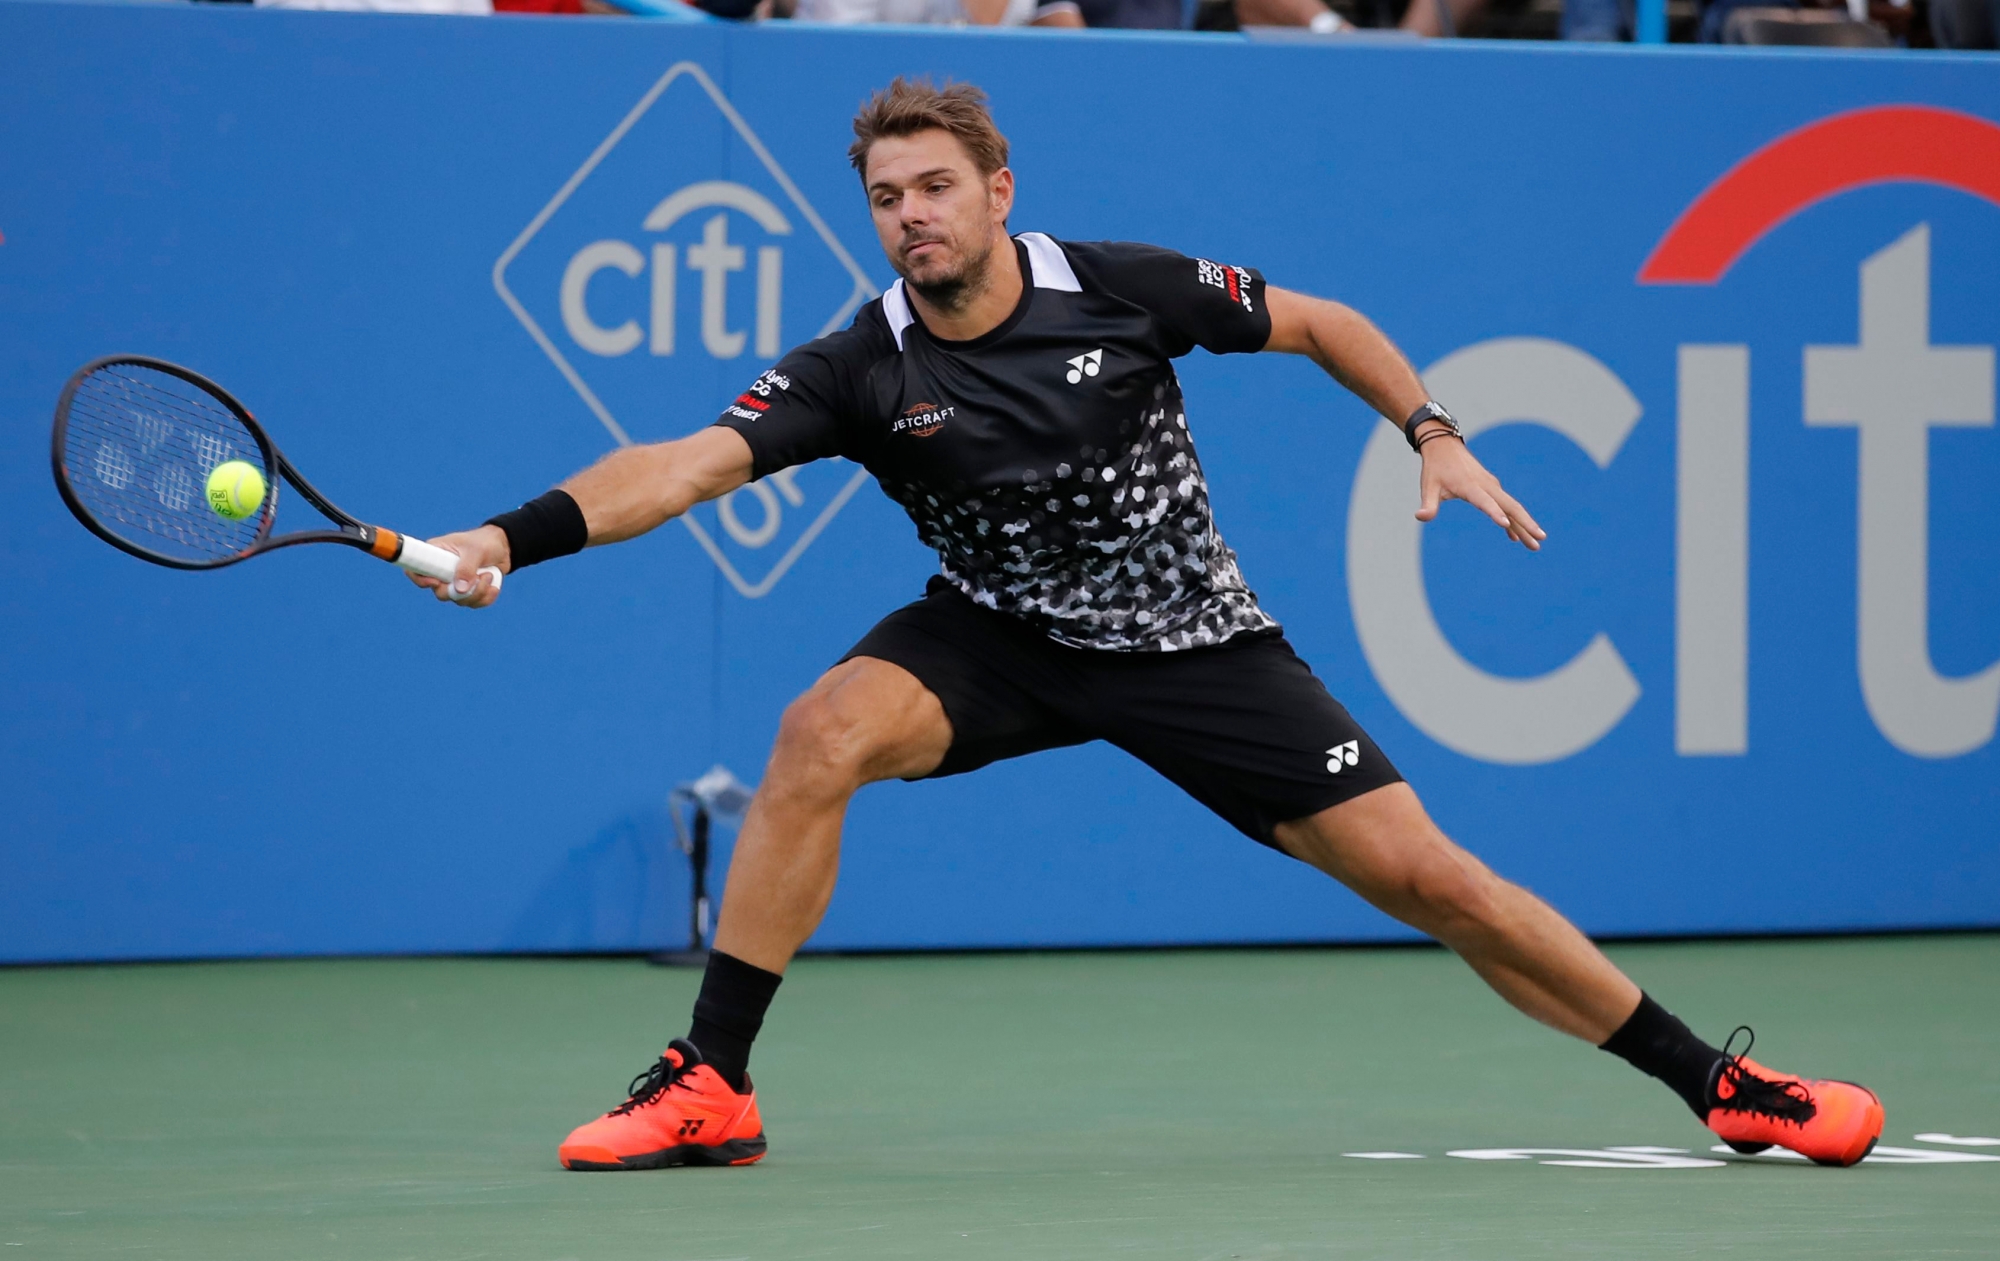 Stan Wawrinka of Switzerland returns against Donald Young during the first round of the Citi Open tennis tournament, Tuesday, July 31, 2018, in Washington. (AP Photo/Carolyn Kaster) Washington Tennis